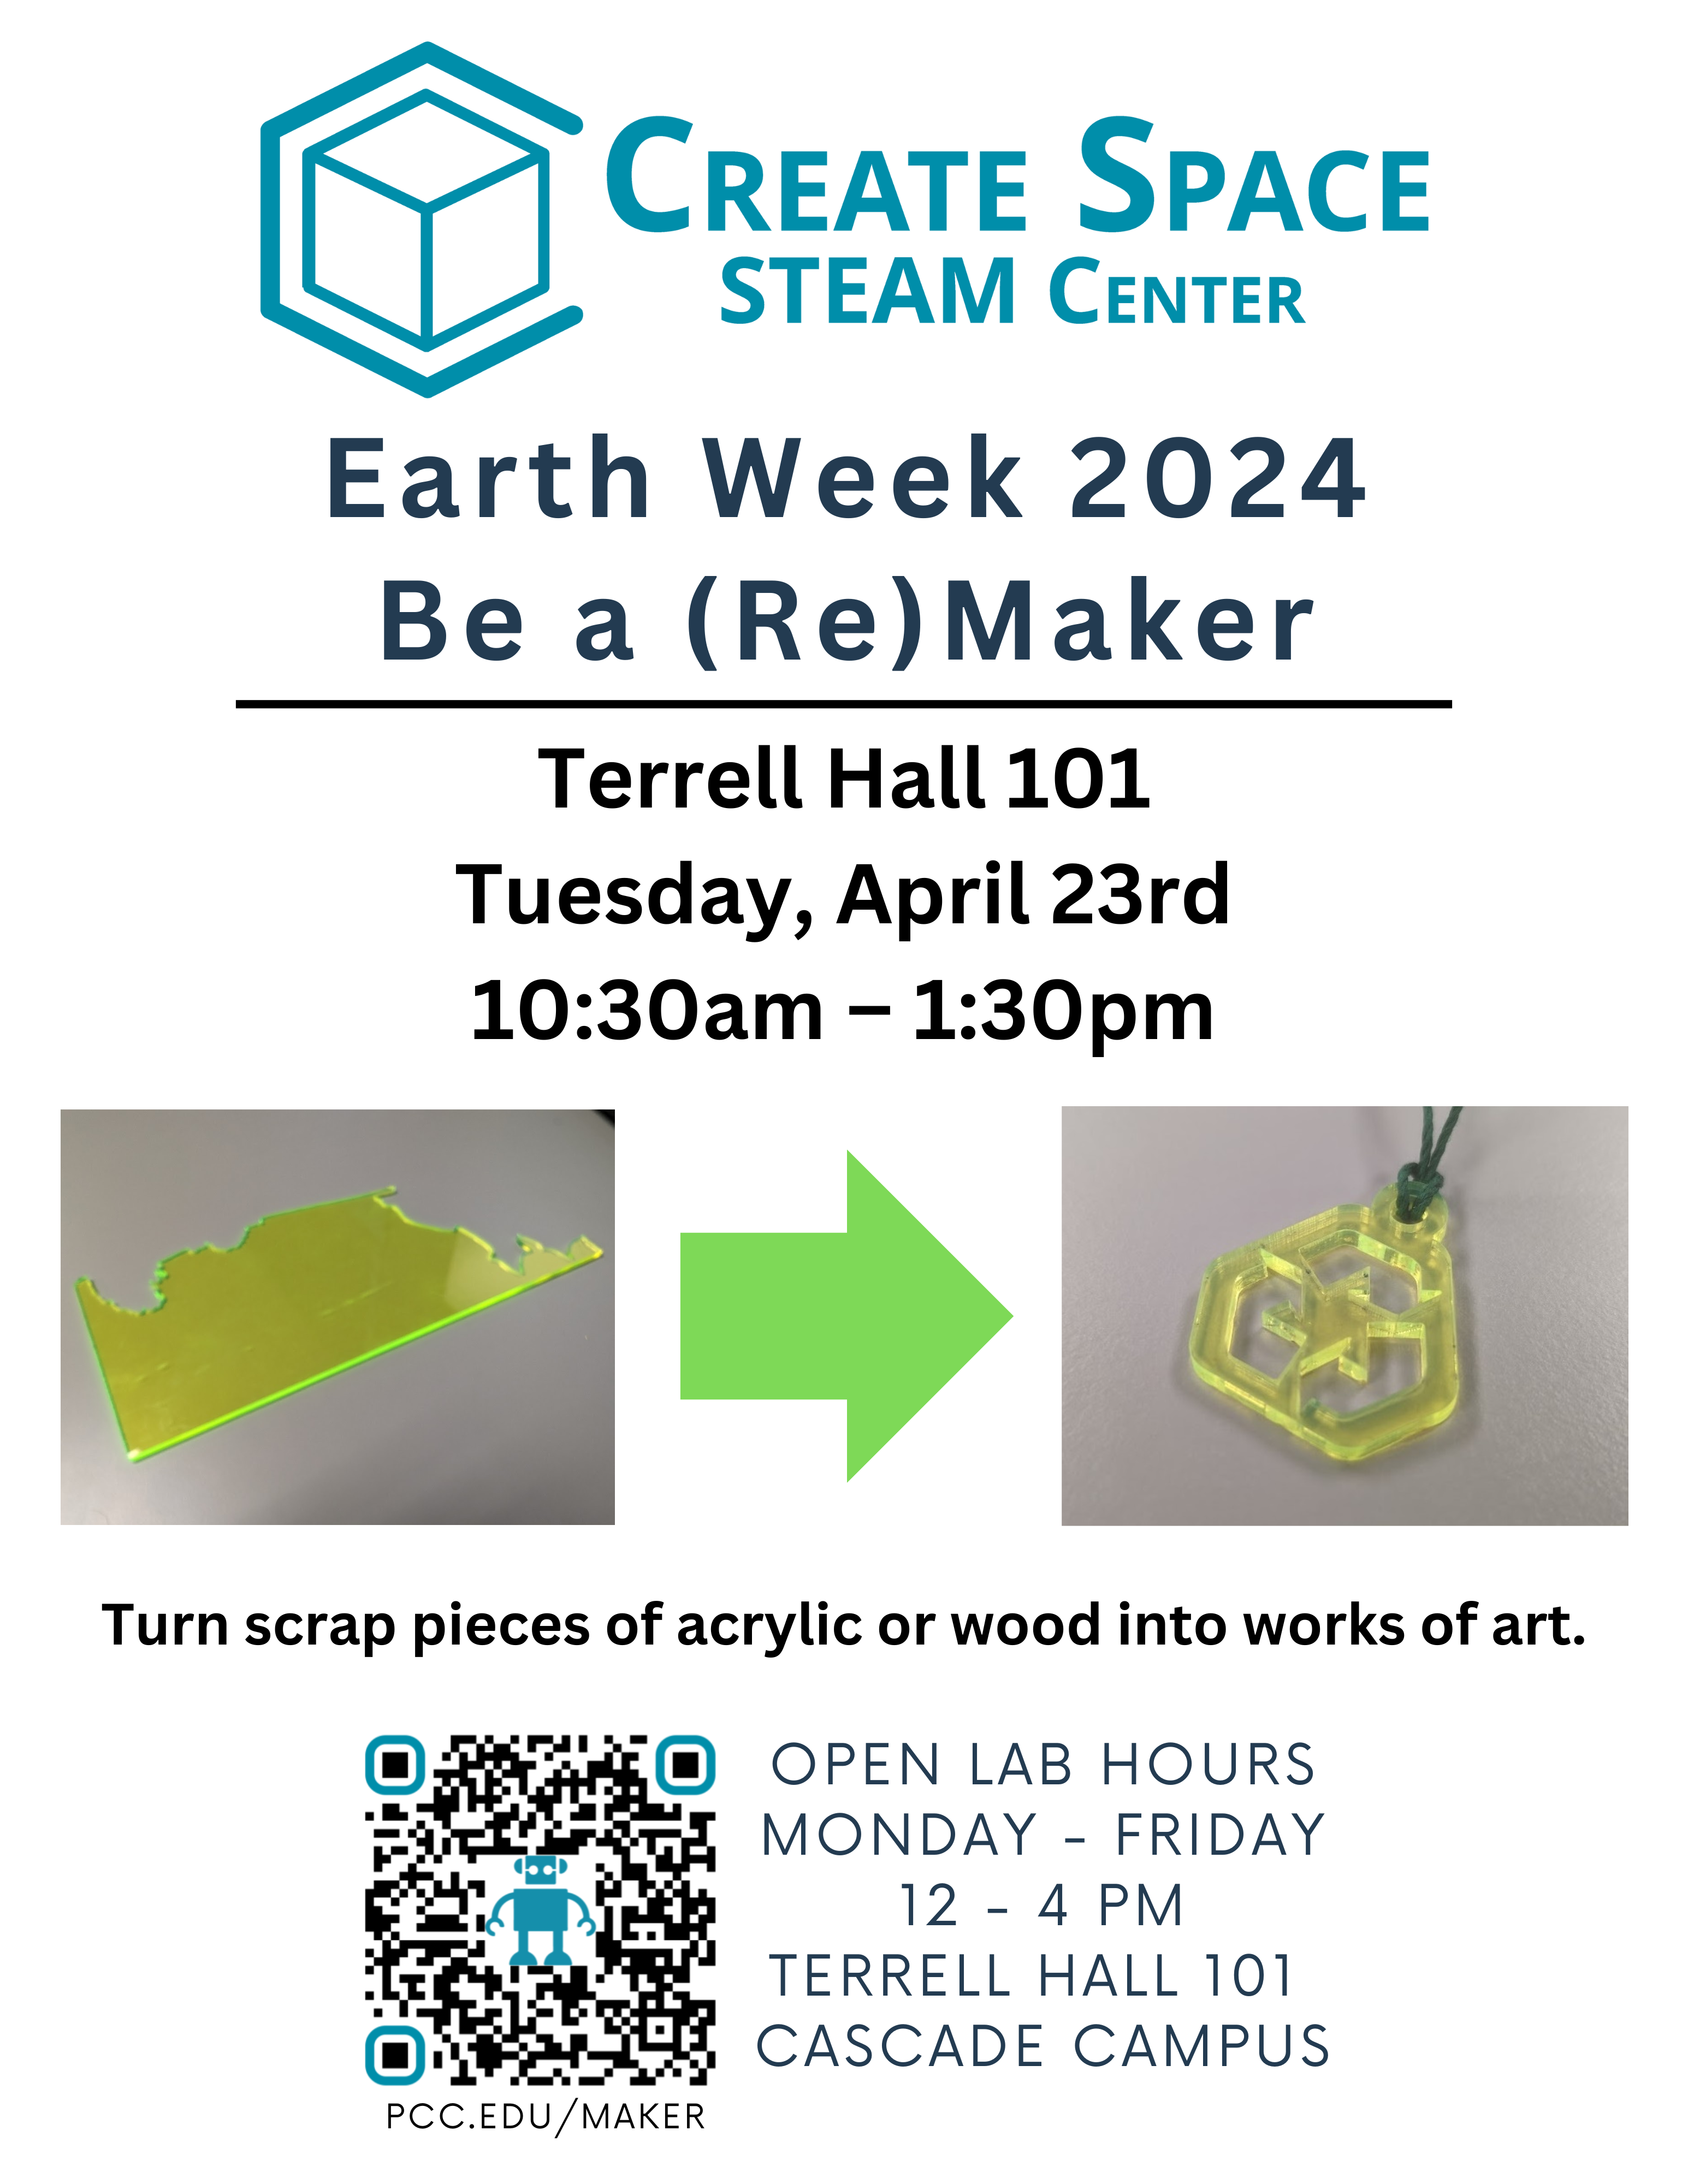 Earth Week 2024
Be a (Re)Maker
Terrell Hall 101
Tuesday, April 23rd
10:30am – 1:30pm
Turn scrap pieces of acrylic or wood into works of art.
Open Lab Hours
Monday - Friday
12 - 4 PM
Terrell Hall 101 
Cascade Campus
pcc.edu/maker